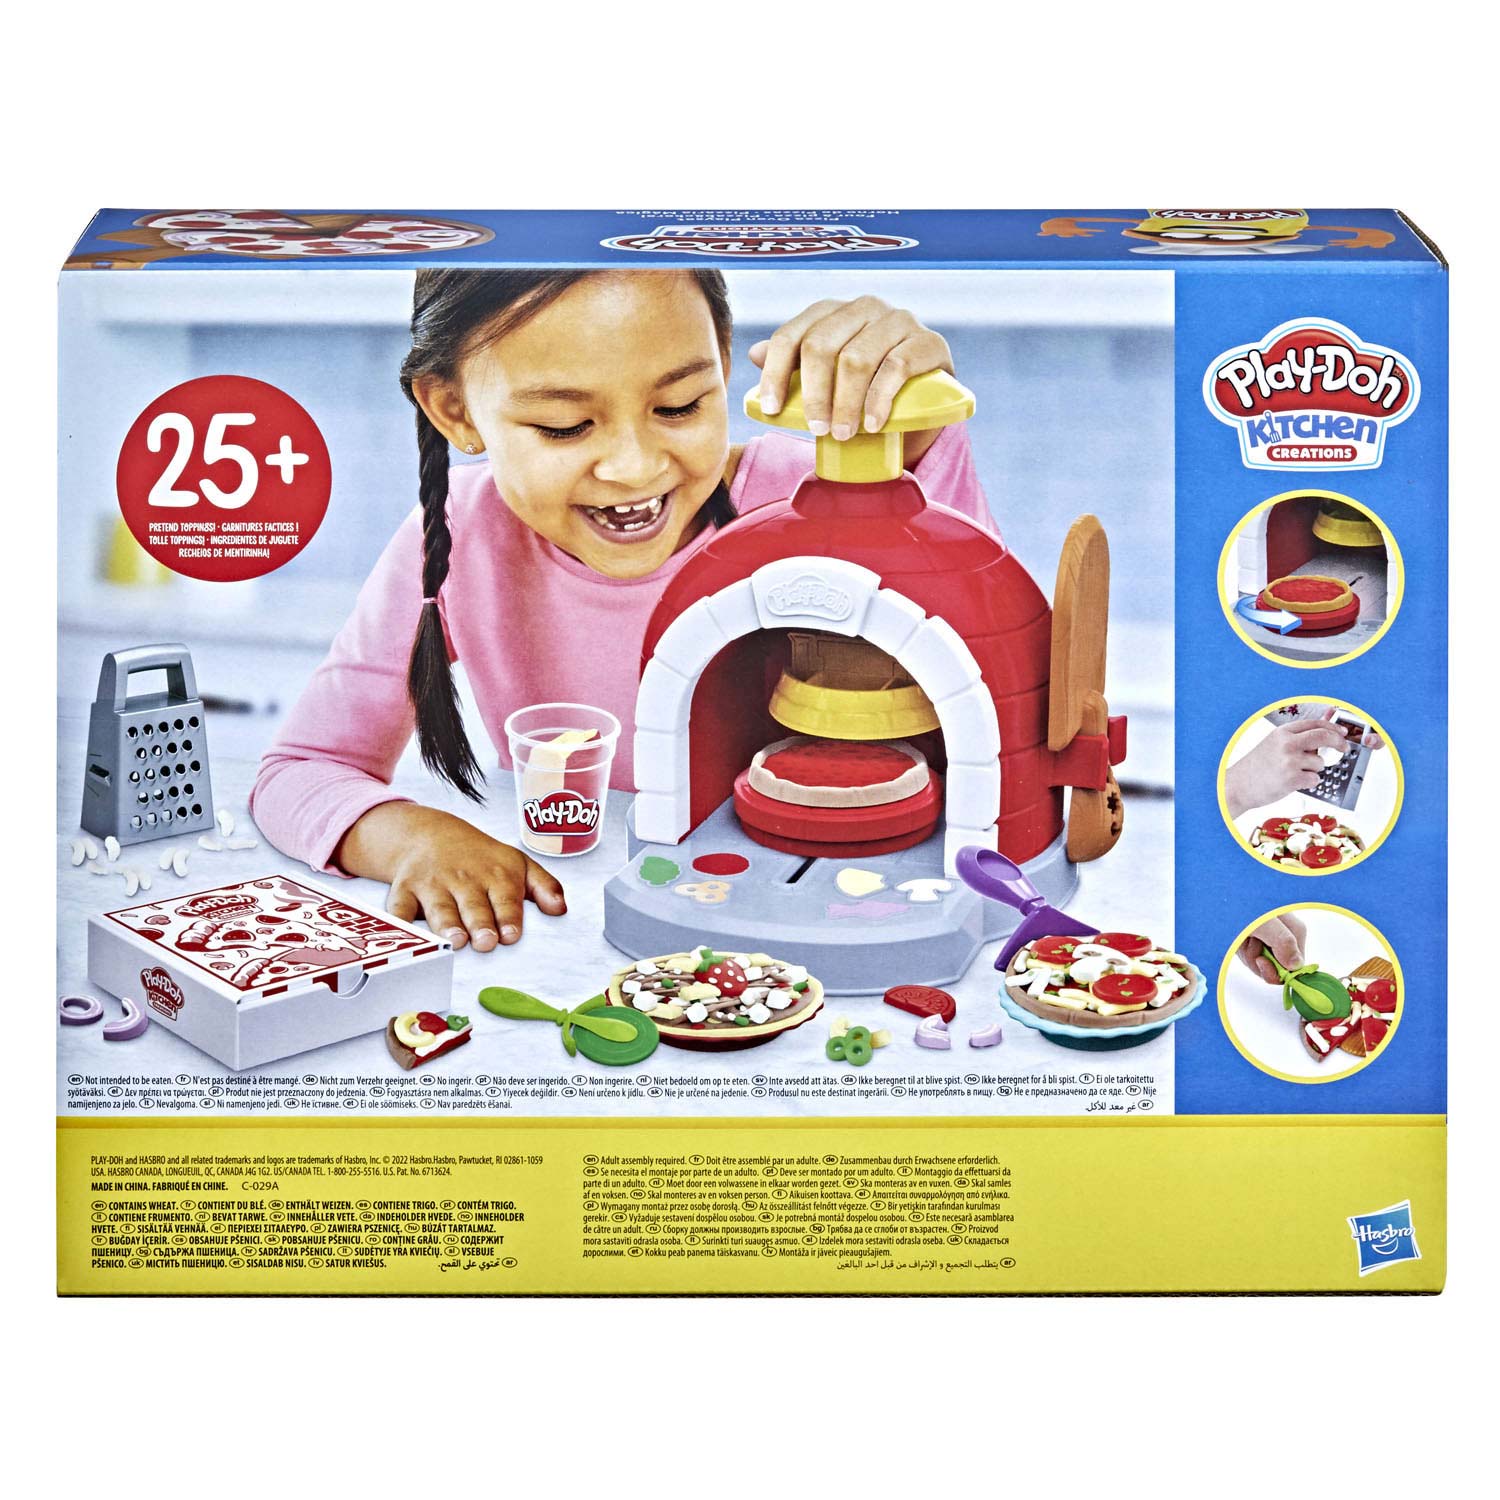 Play-Doh Pizza Oven - Klei Speelset